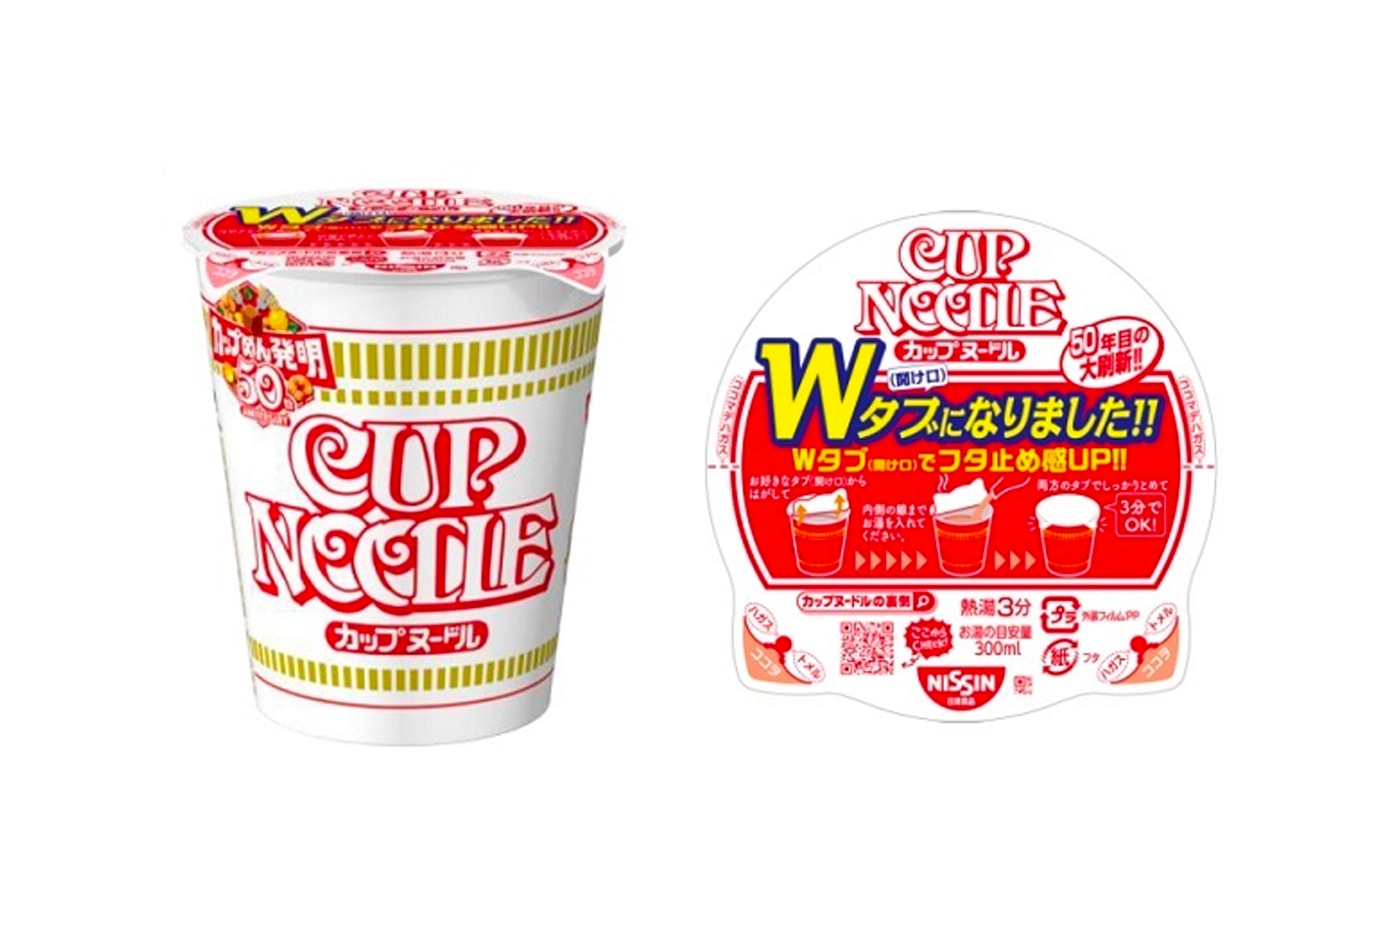 https://image-cdn.hypb.st/https%3A%2F%2Fhypebeast.com%2Fimage%2F2021%2F06%2Fnissin-cup-noodle-saving-33-tons-plastic-waste-annually-info-001.jpg?cbr=1&q=90